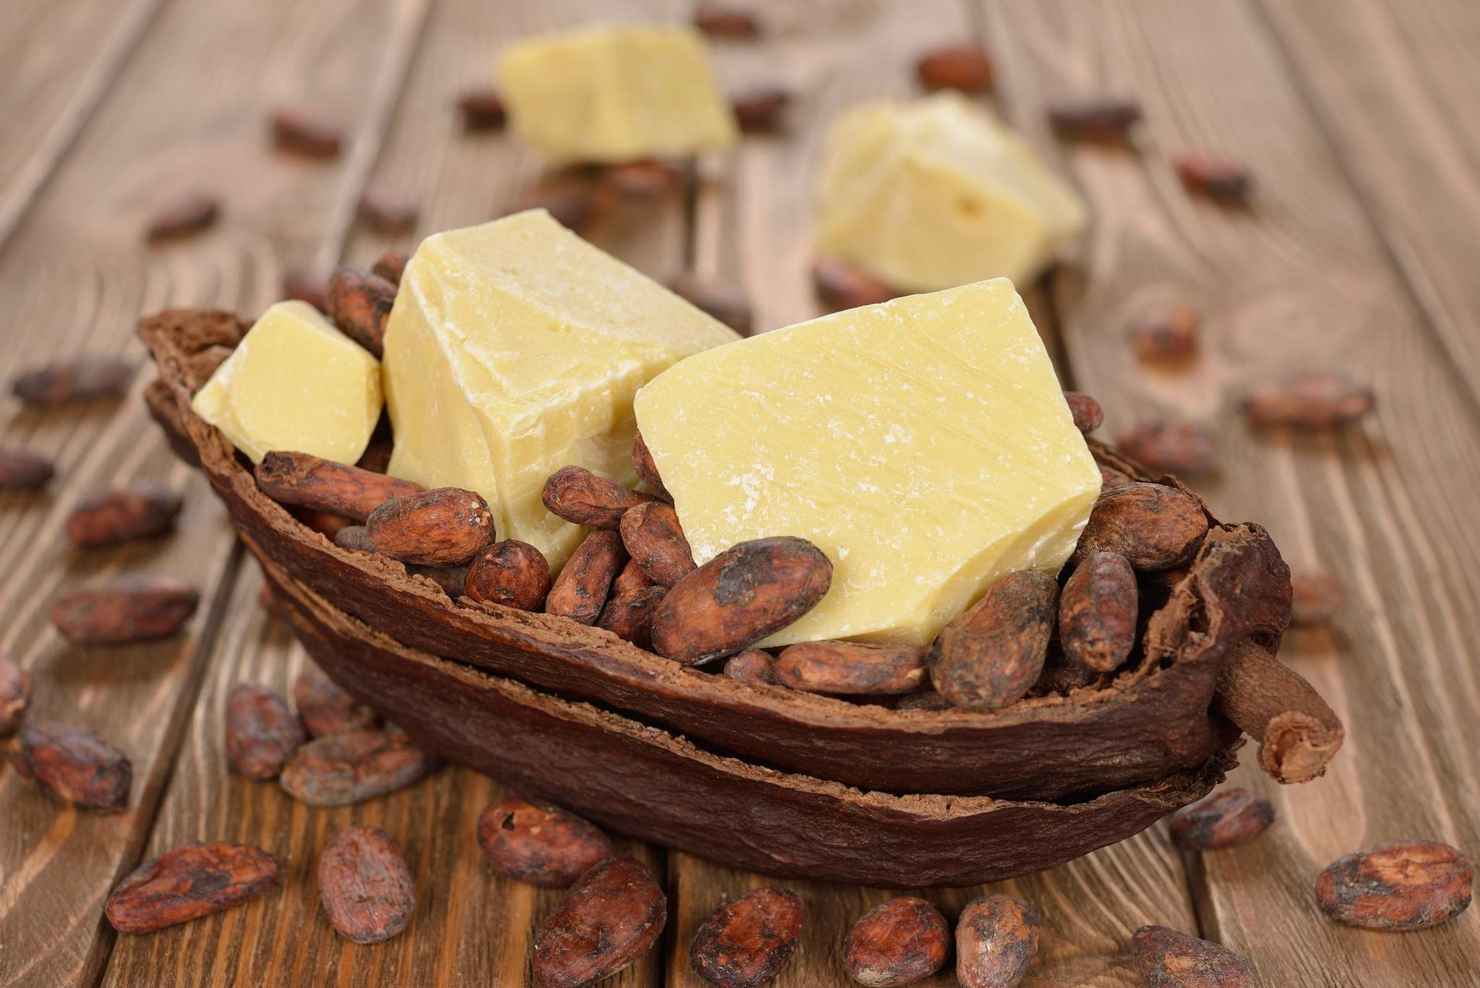 Black Seife Cocoa nuts Cocoa butter healthy Palmlove facial skin